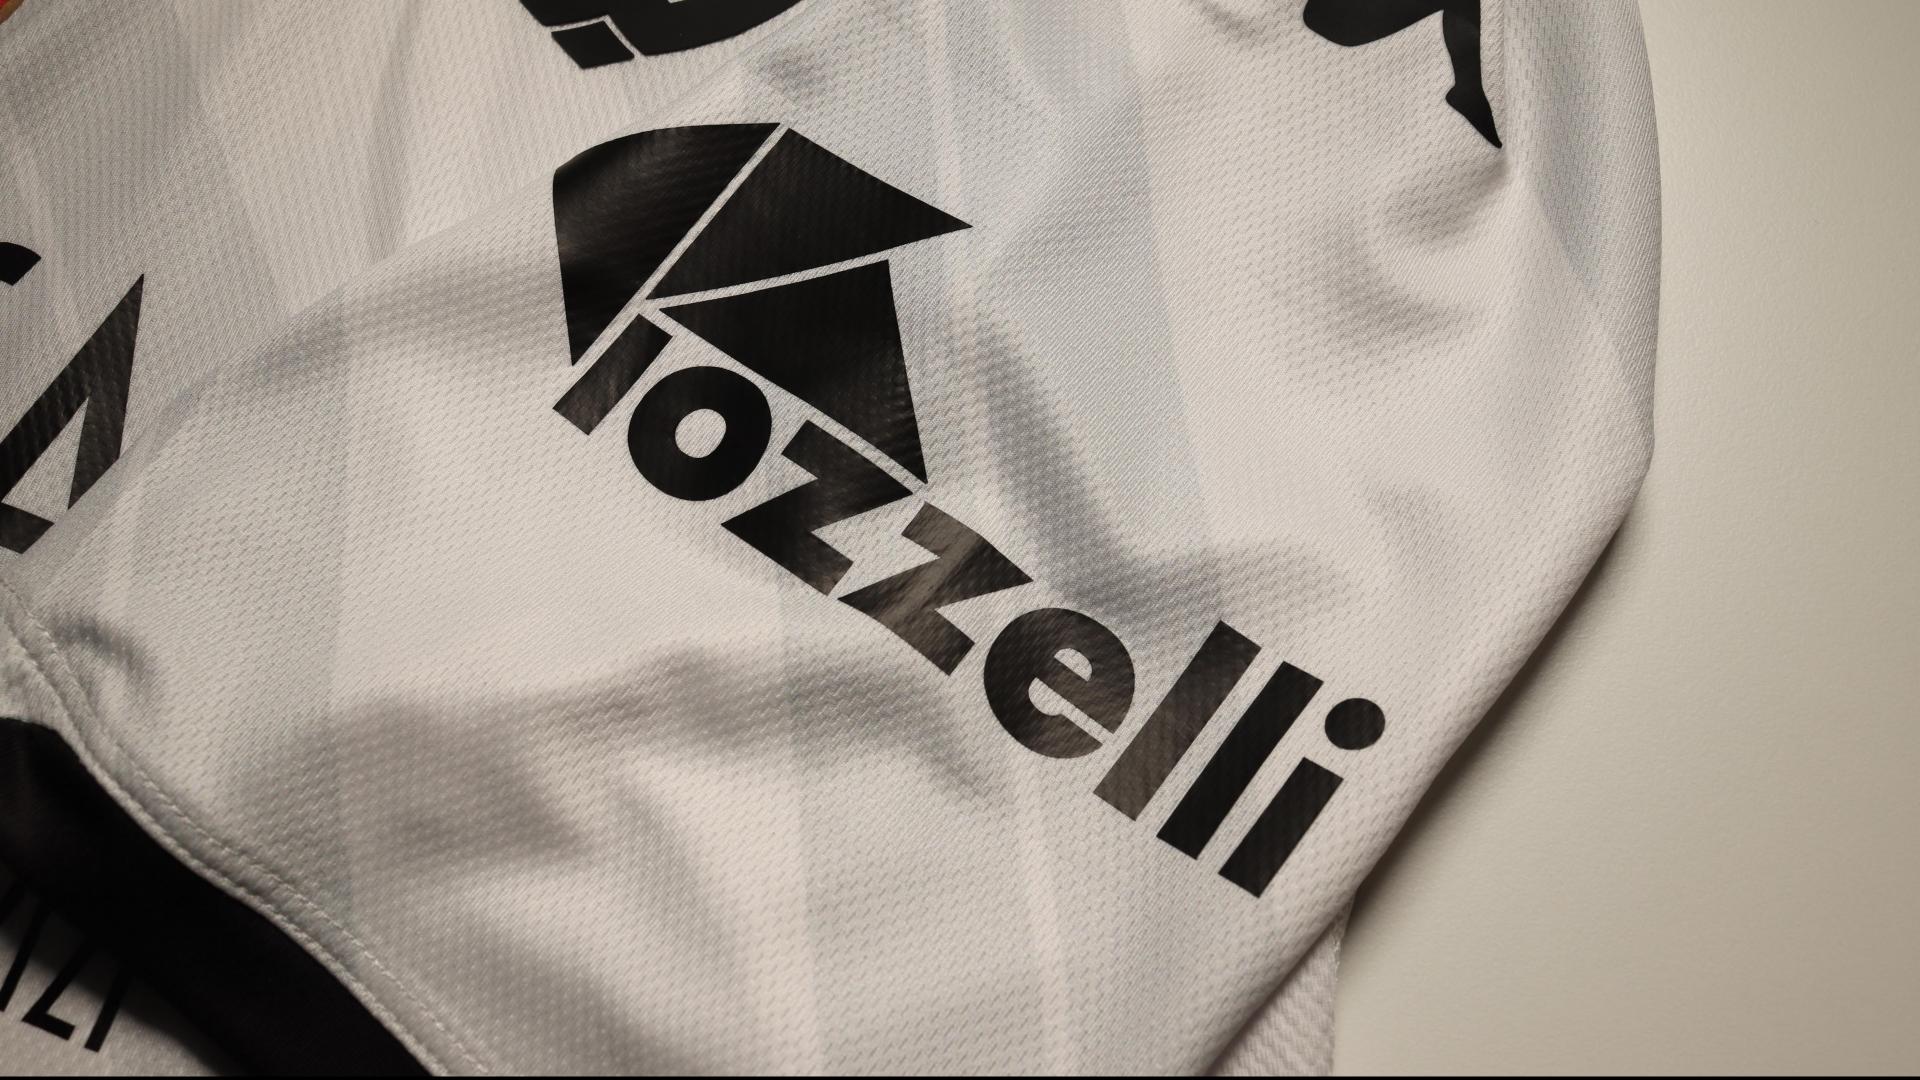 Iozzelli is confirmed as Sleeve Sponsor of Spezia Calcio again for the '23/'24 and '24/'25 seasons